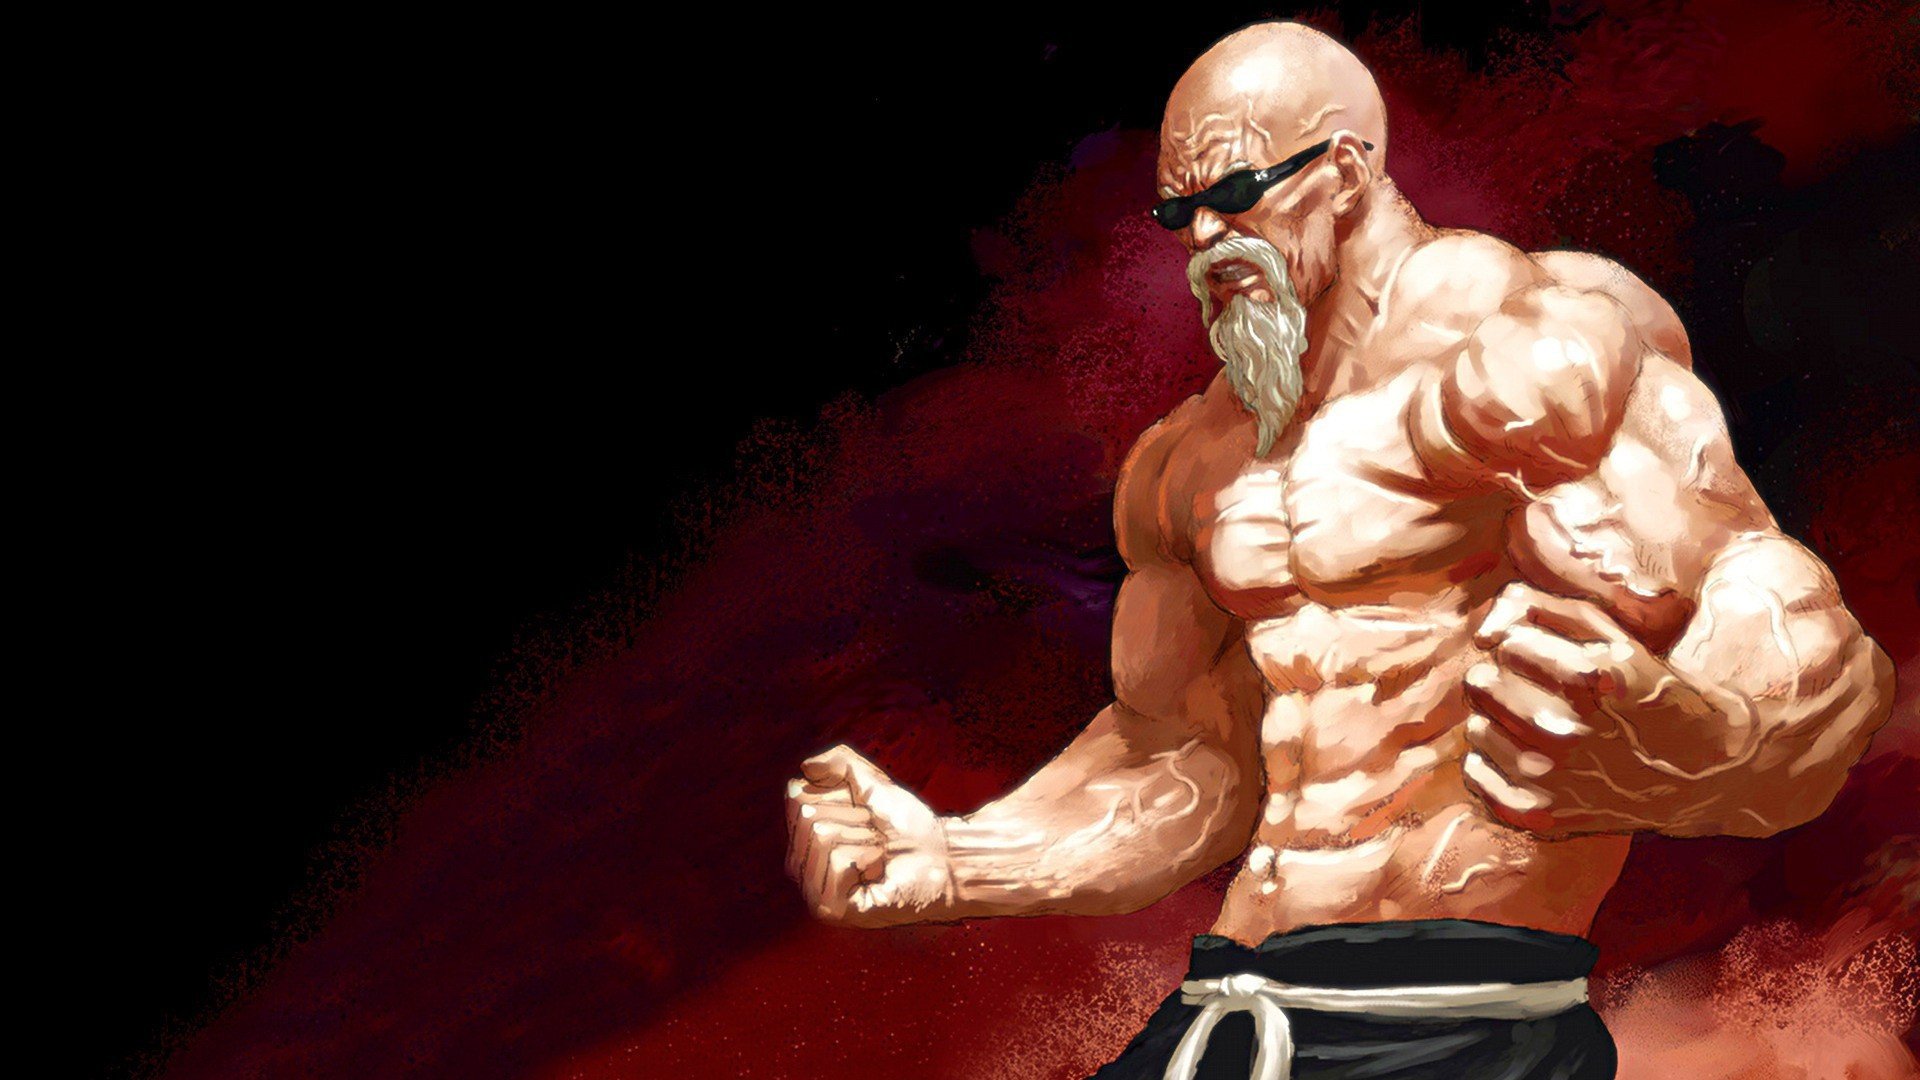 Anime Muscle Wallpapers - Wallpaper Cave